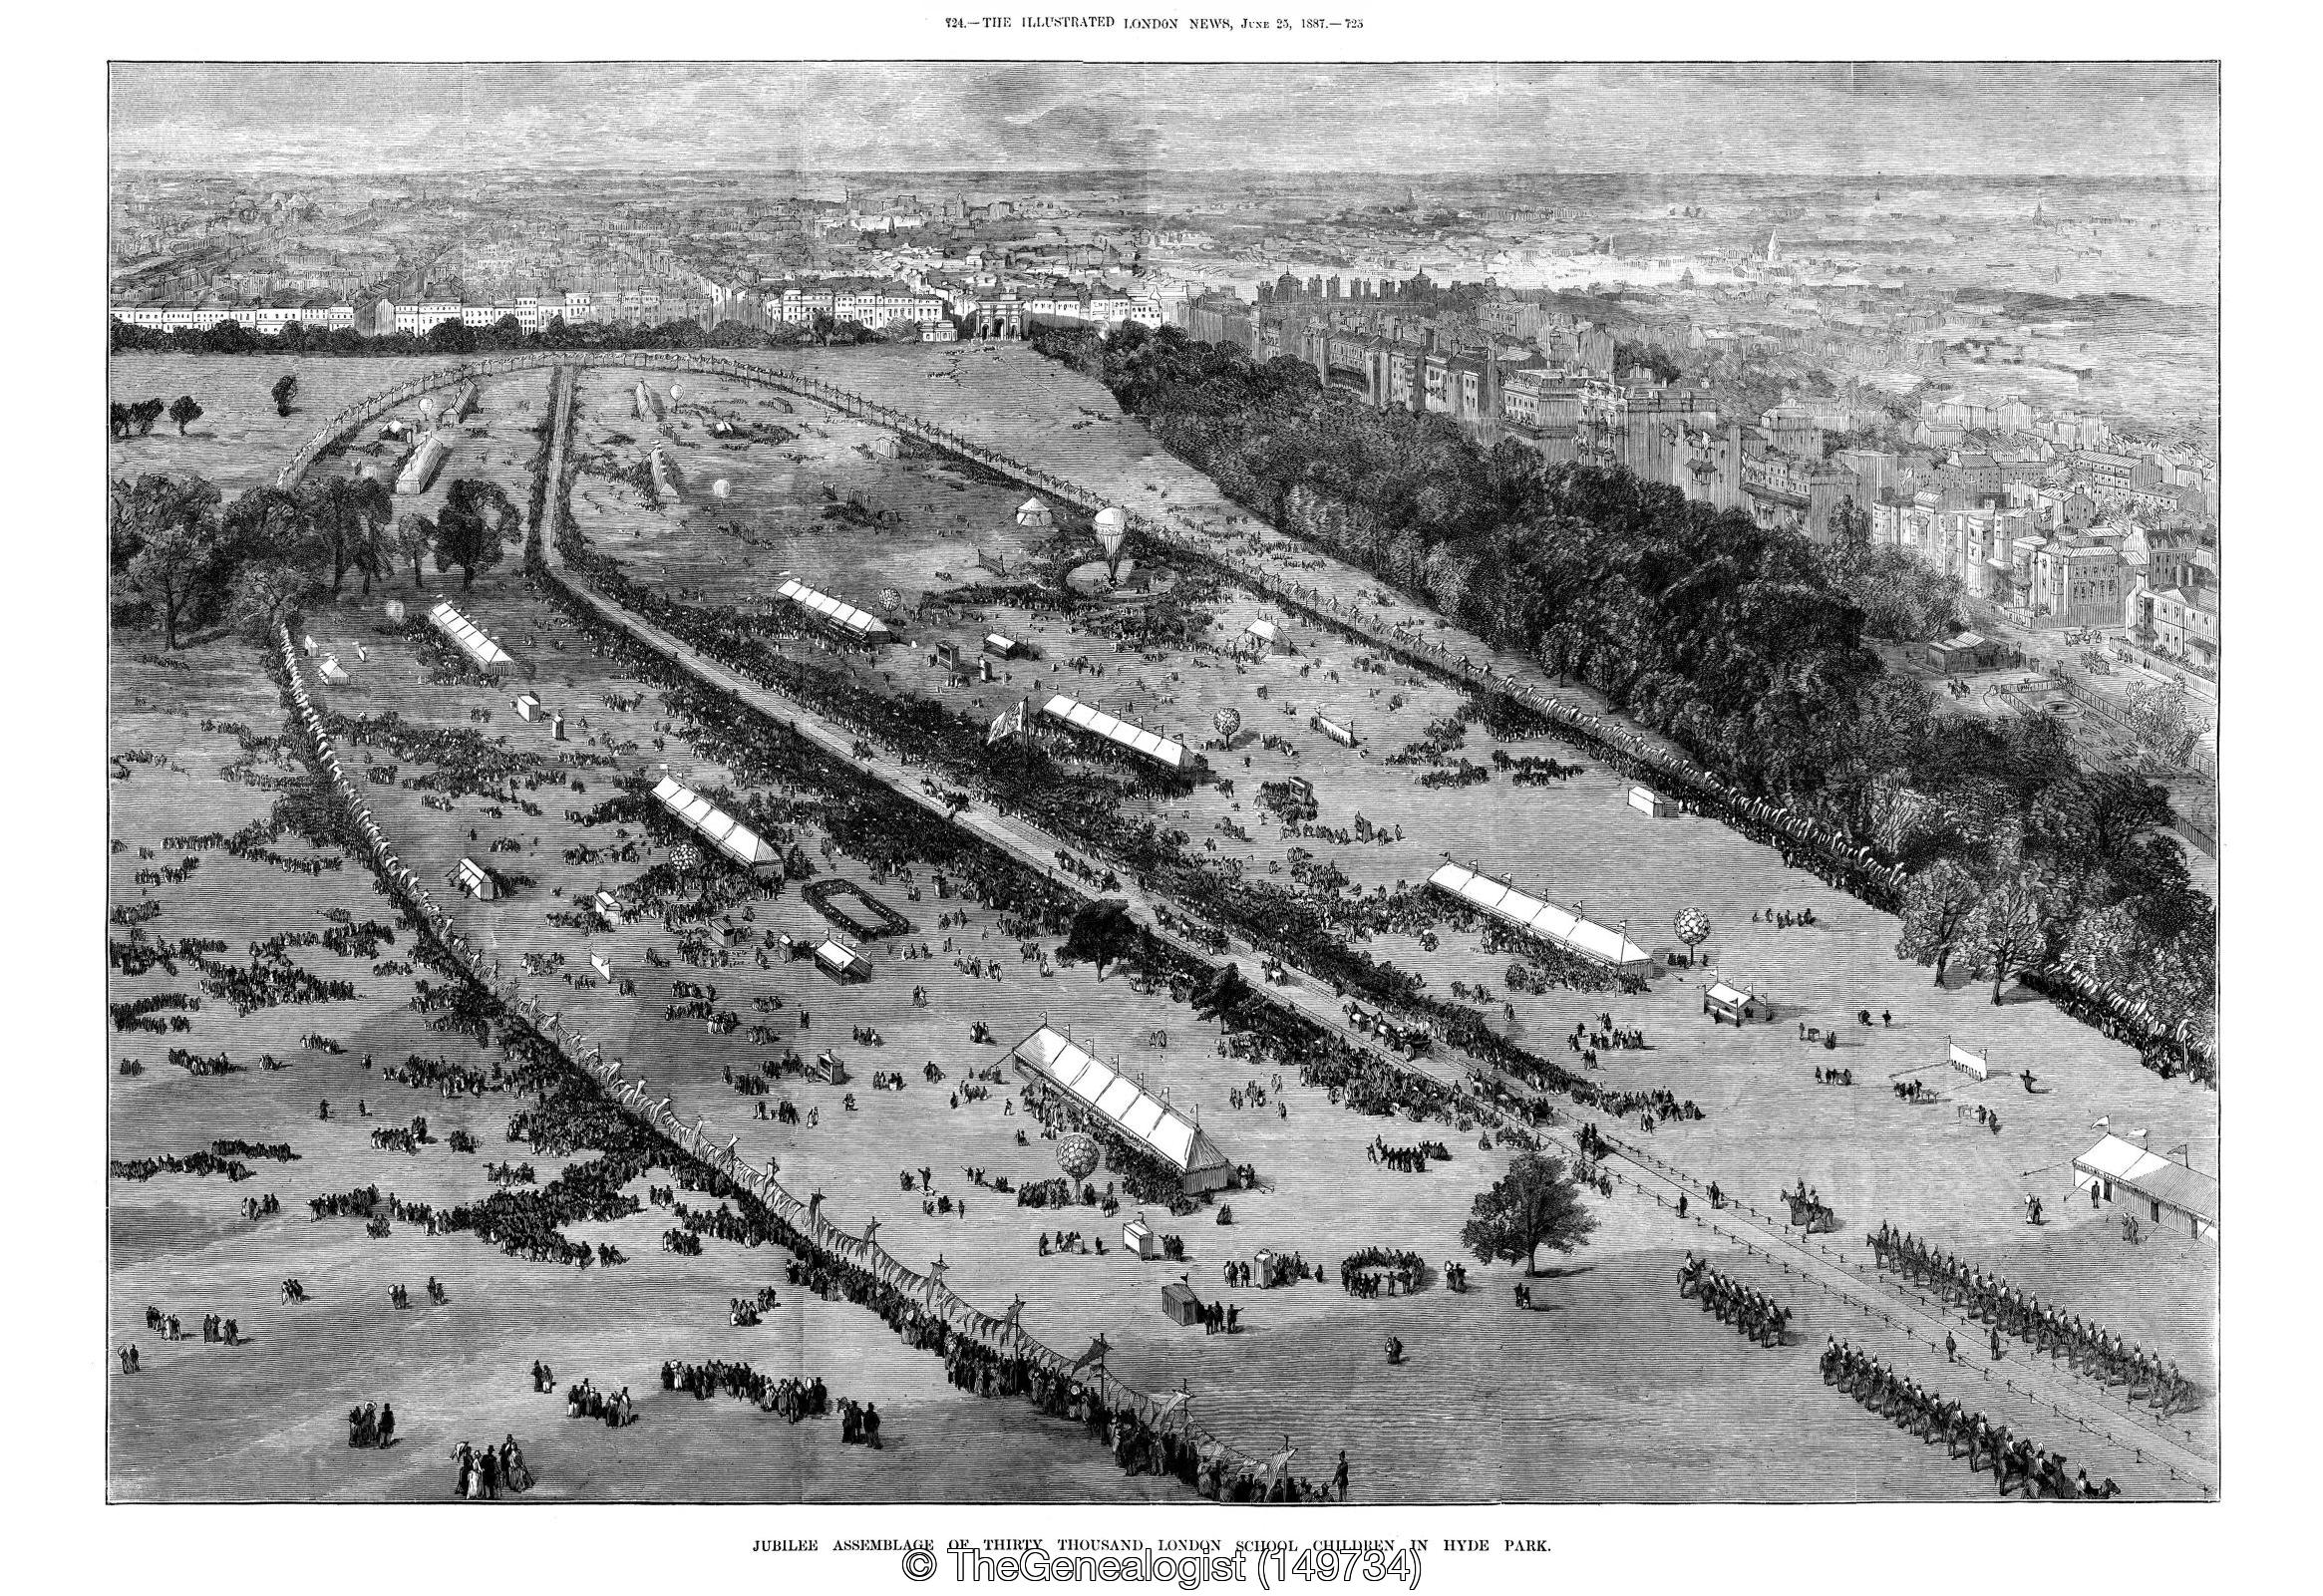 Hyde Park in 1887 saw the assemblage of thirty thousand London school children for the Golden Jubilee